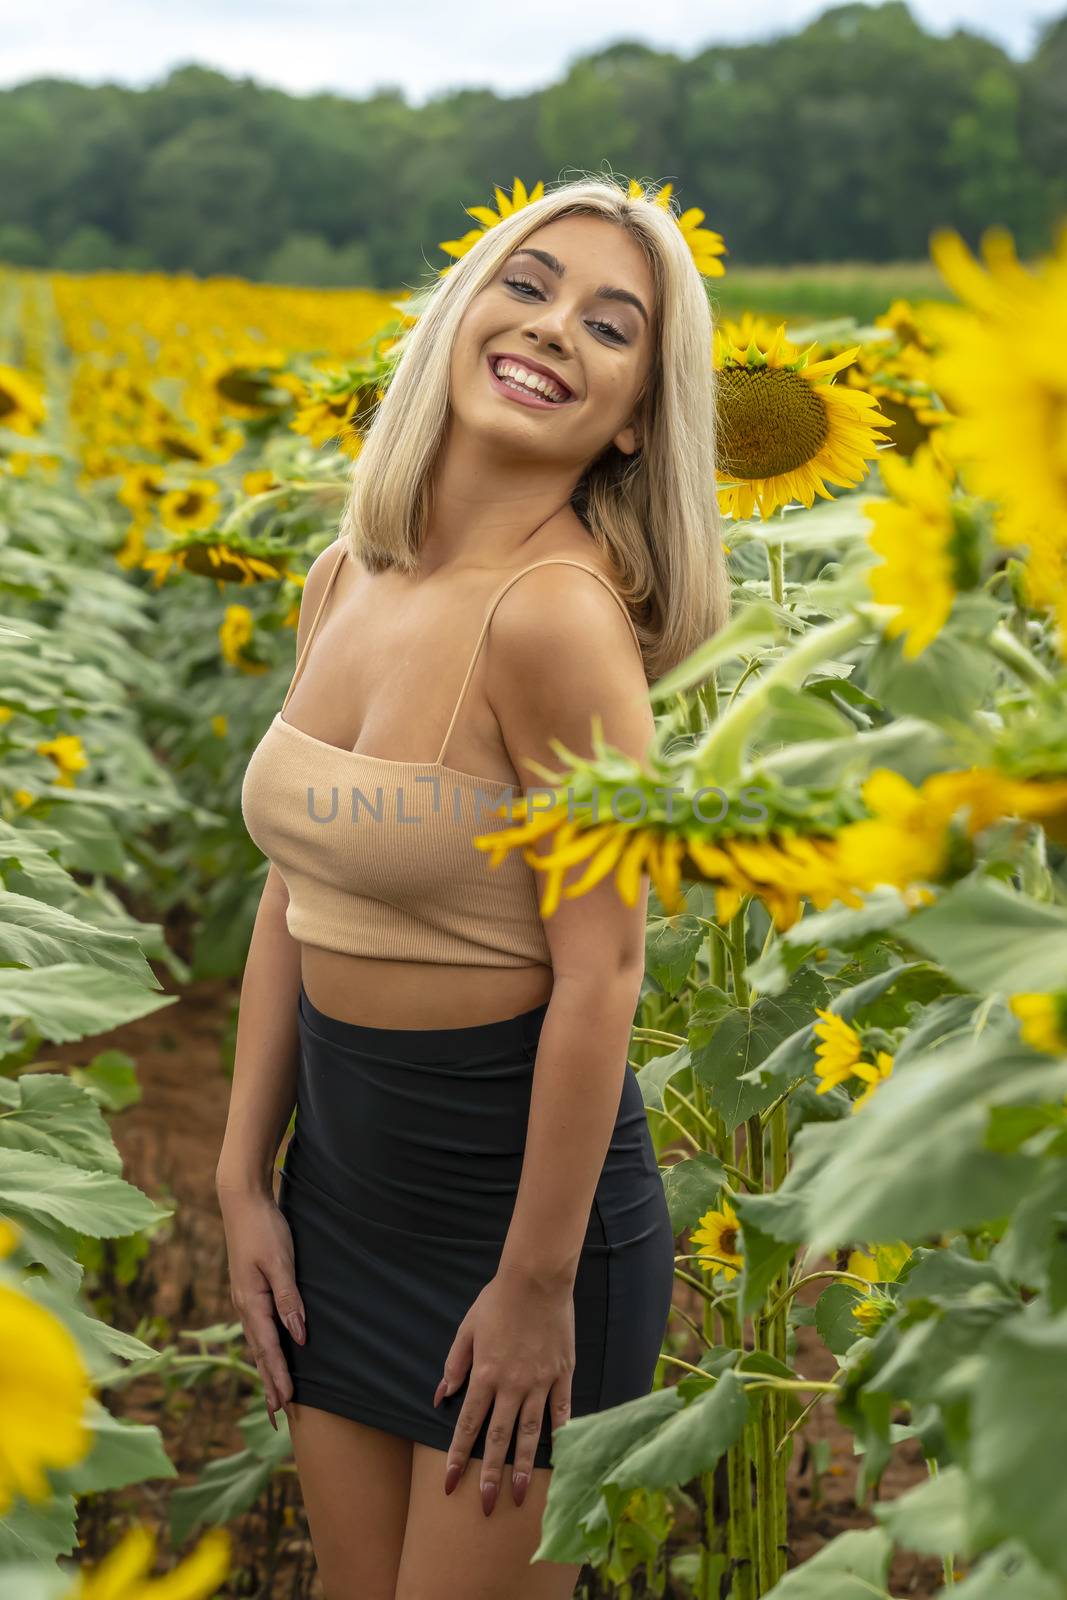 A gorgeous young blonde model poses outdoors in a field of sunflowers while enjoying a summers day